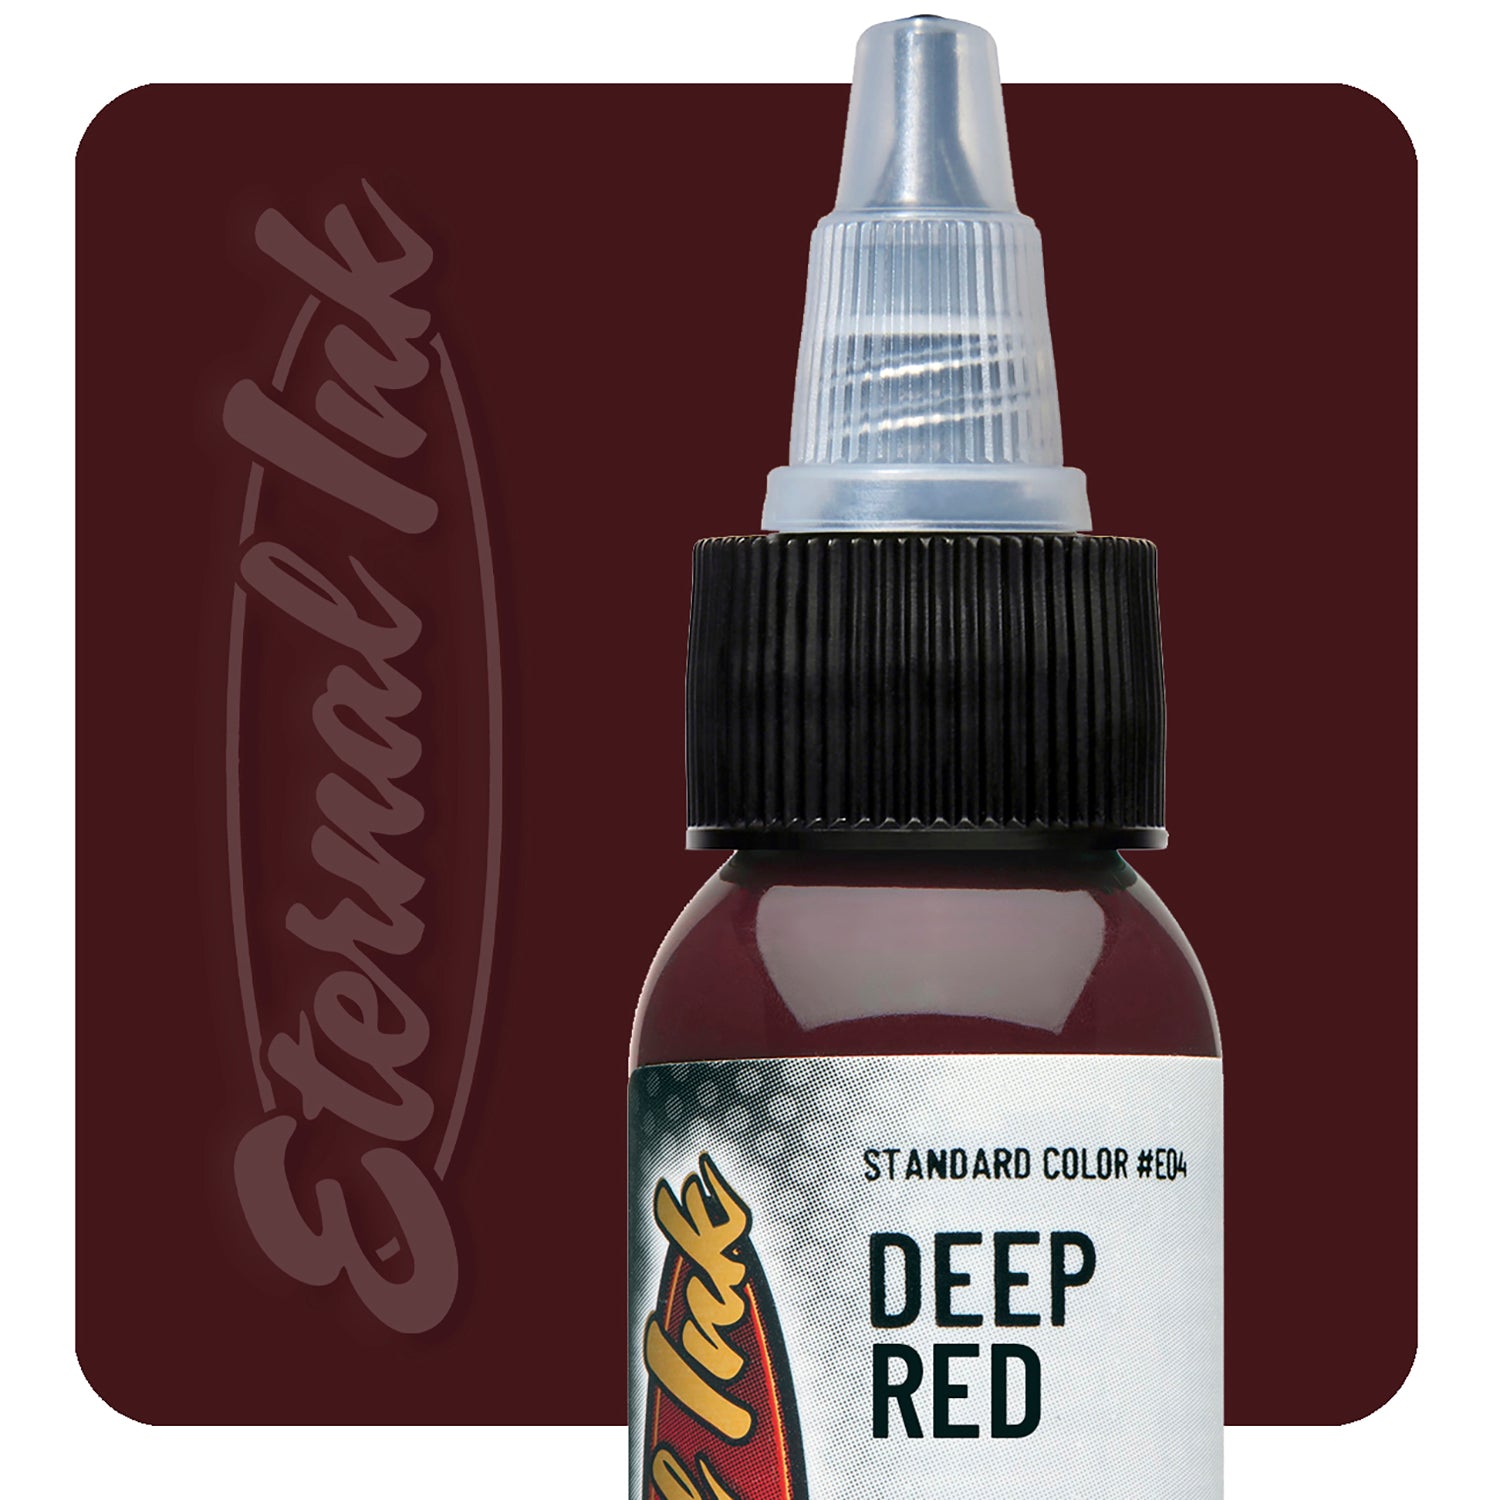 Eternal Ink Tattoo Ink in Deep Red, Size: 2 oz Available at TATSoul Tattoo Supply